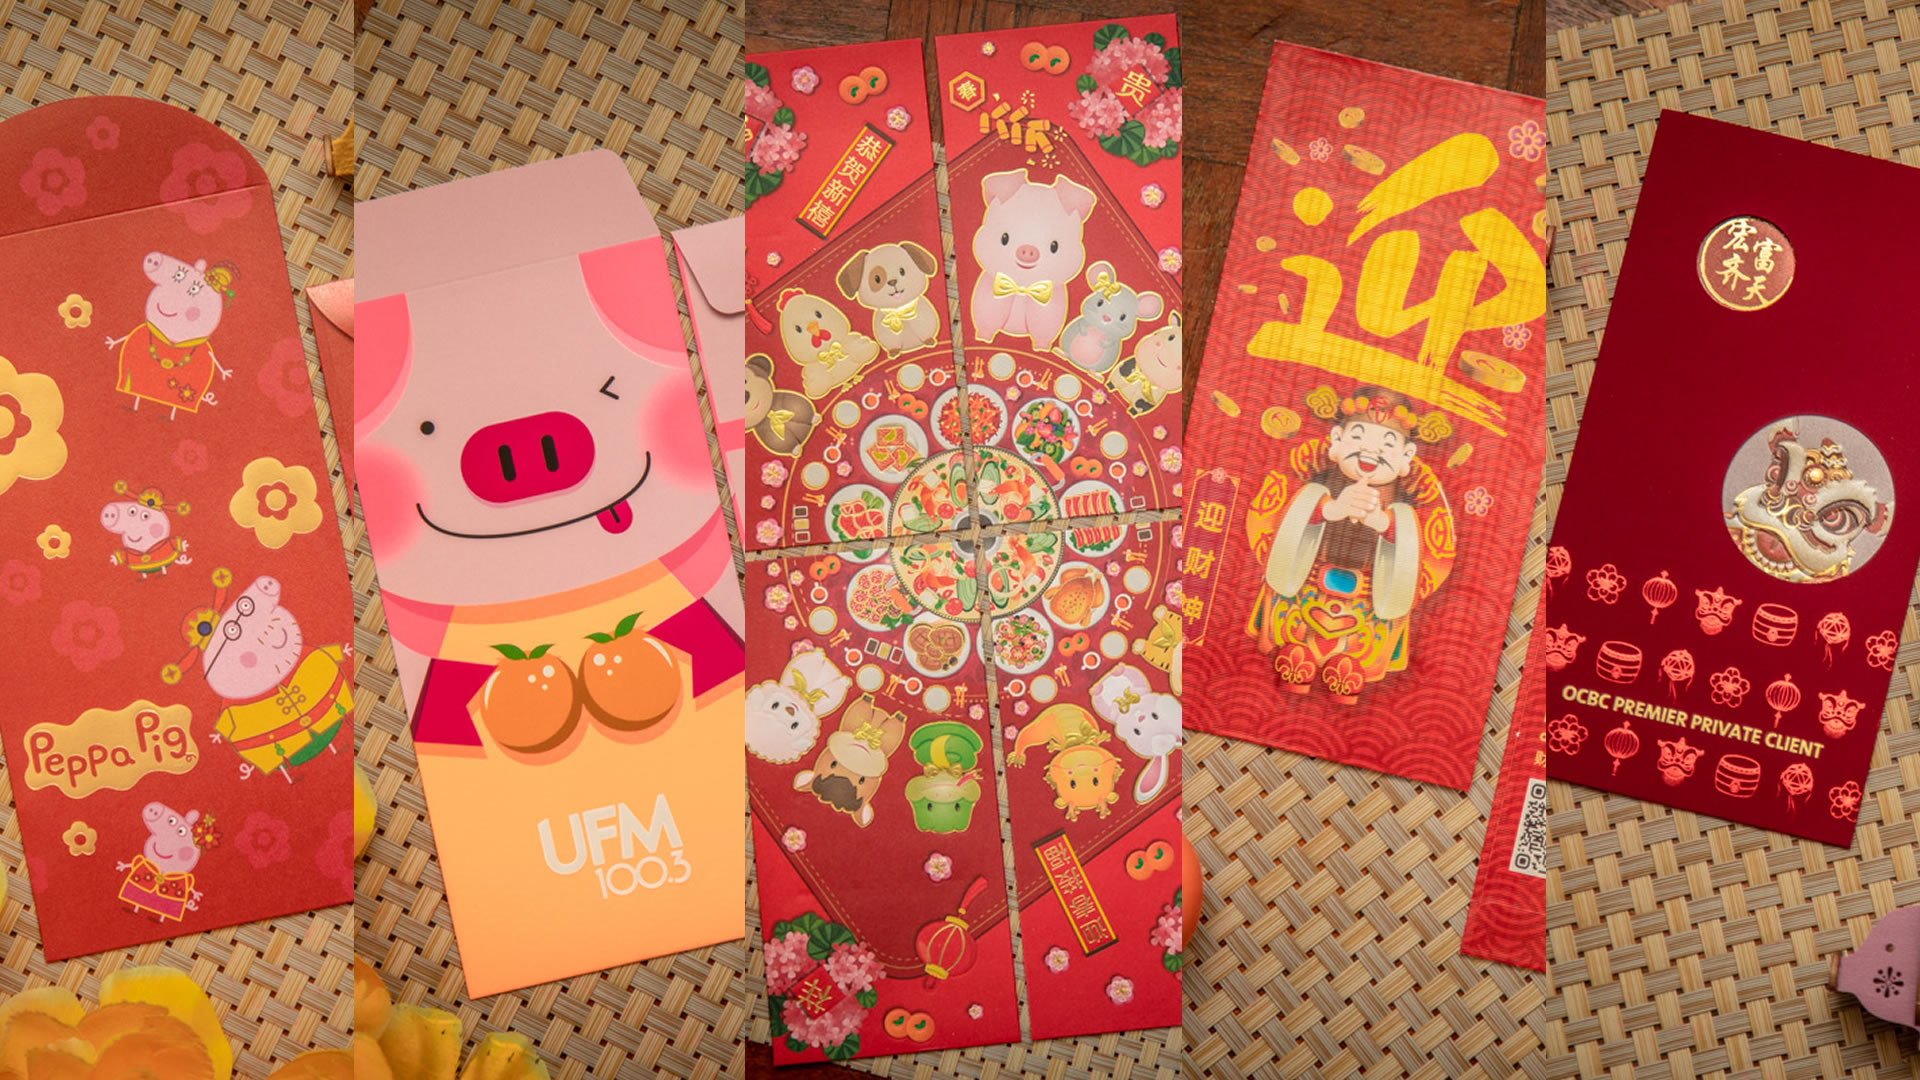 2019 Year of Pig Red Packet collection by Dennis